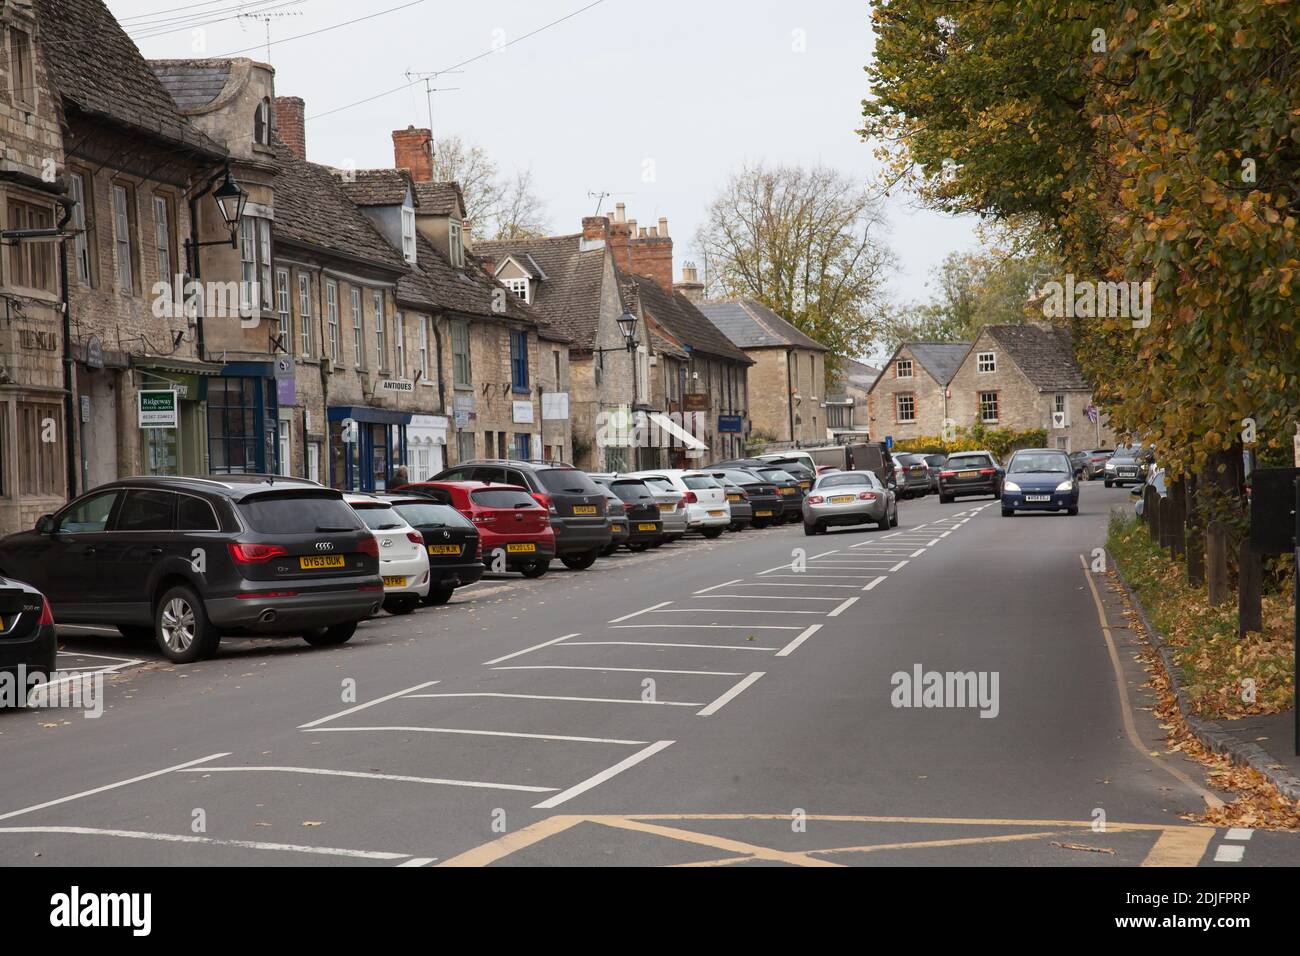 Views of buildings on Oak Street in Lechlade, Gloucestershire in the UK, taken on the 19th October 2020 Stock Photo